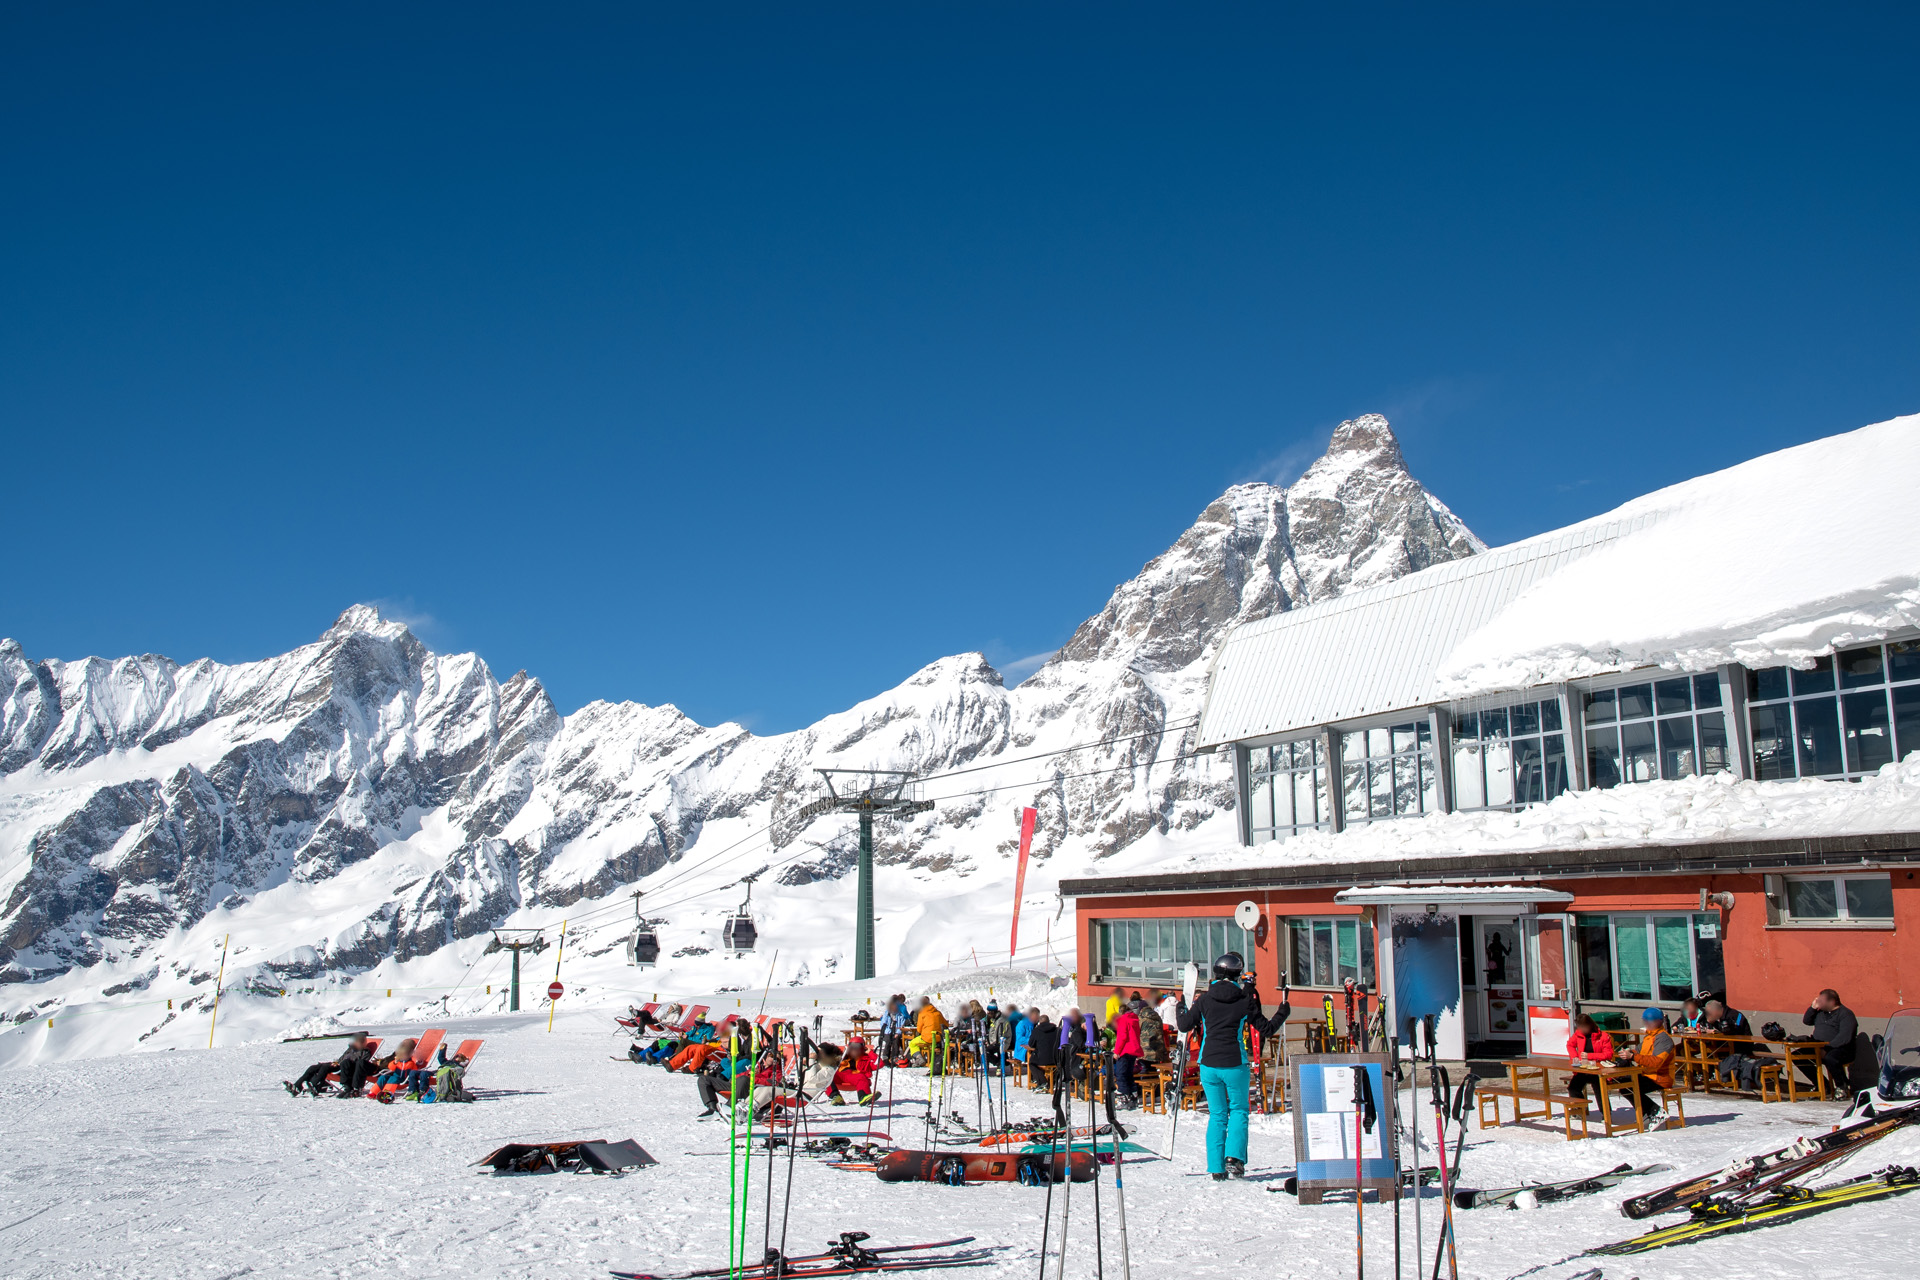 Breuil-Cervinia ski resort and Monte Cervino with a ski lodge in the foreground